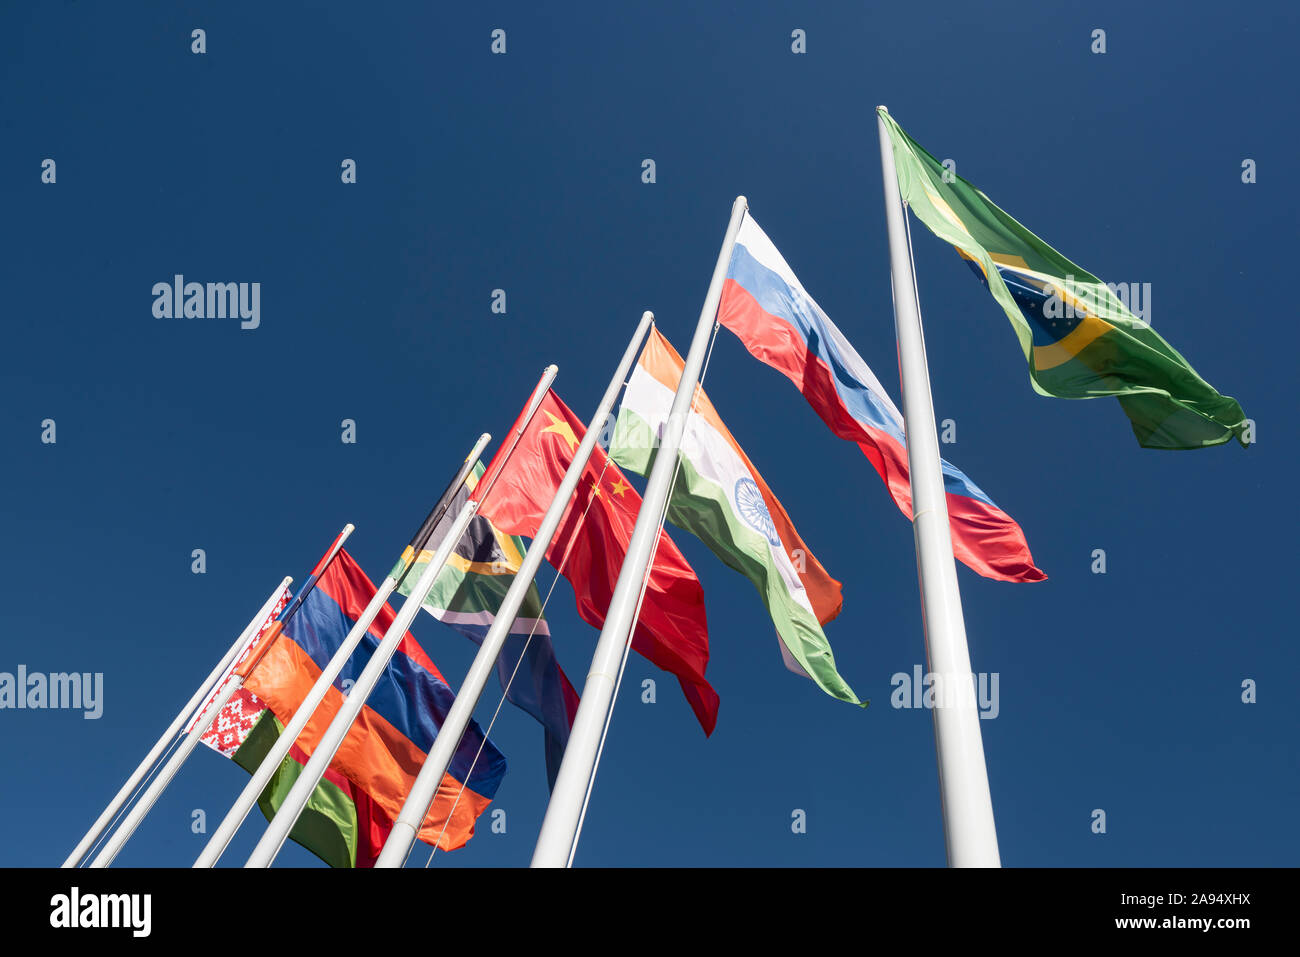 Flags of the BRICS countries in the blue sky. Stock Photo